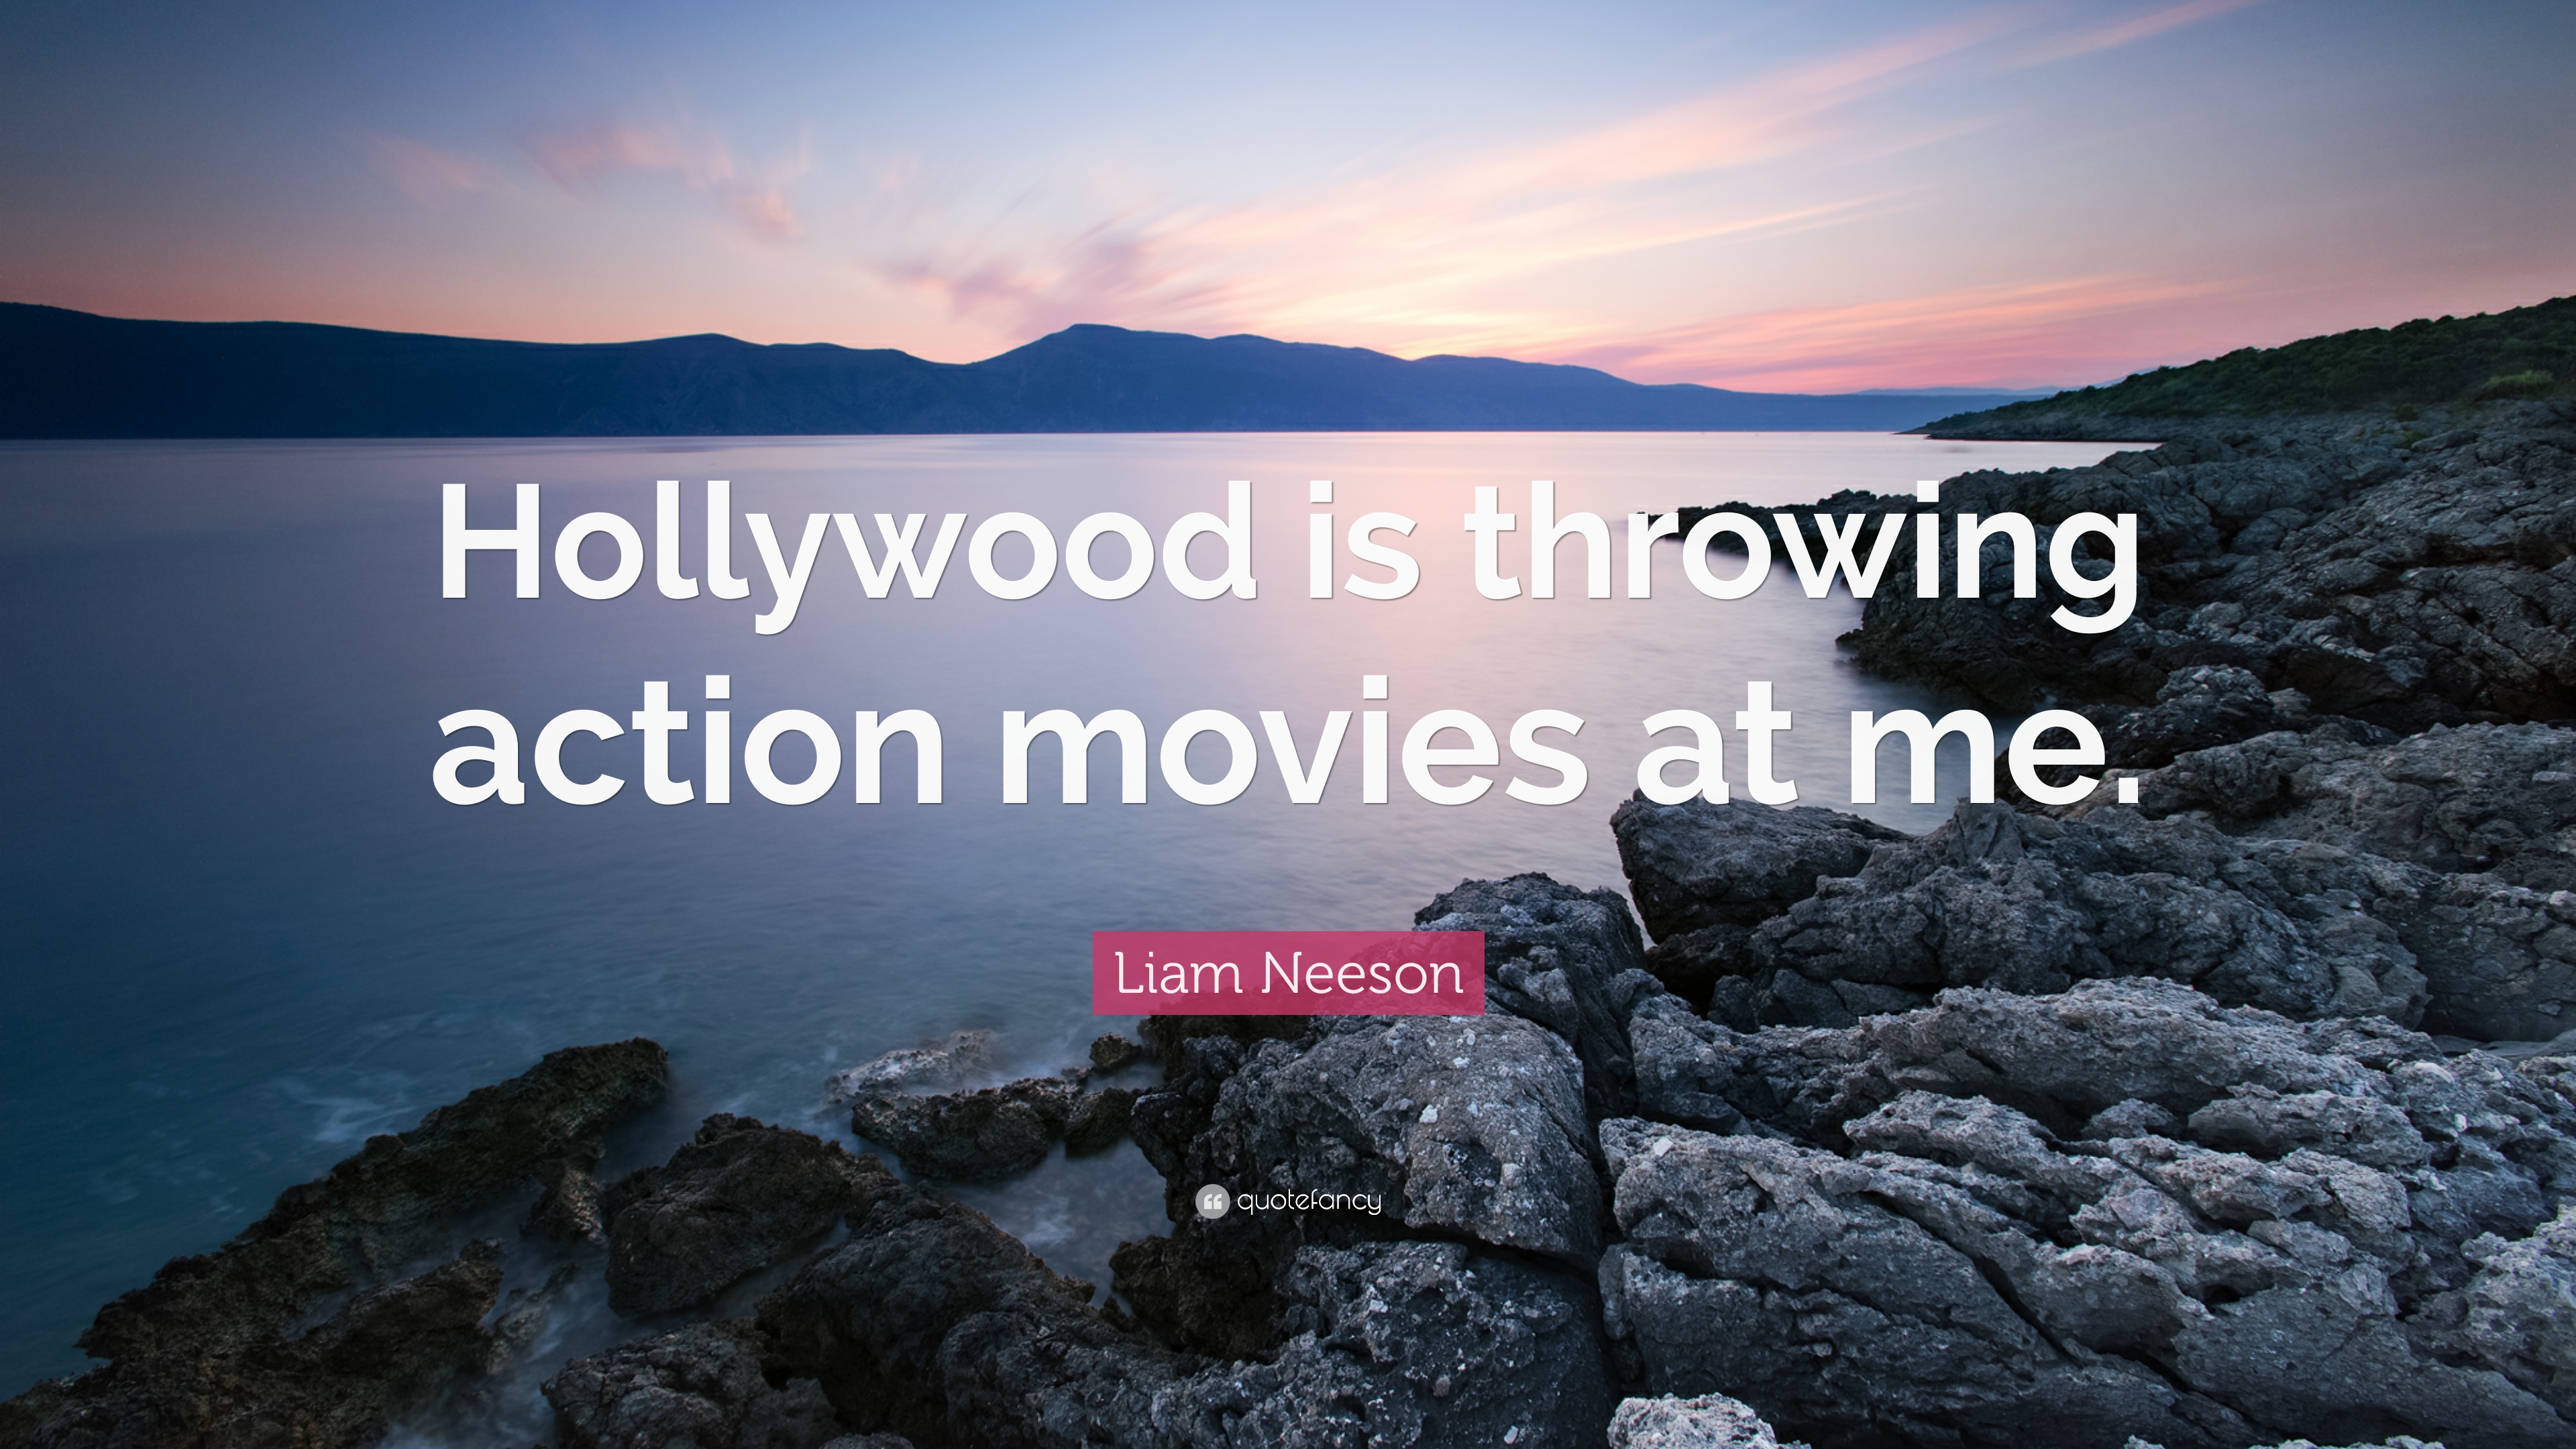 Liam Neeson Quote: “Hollywood is throwing action movies at